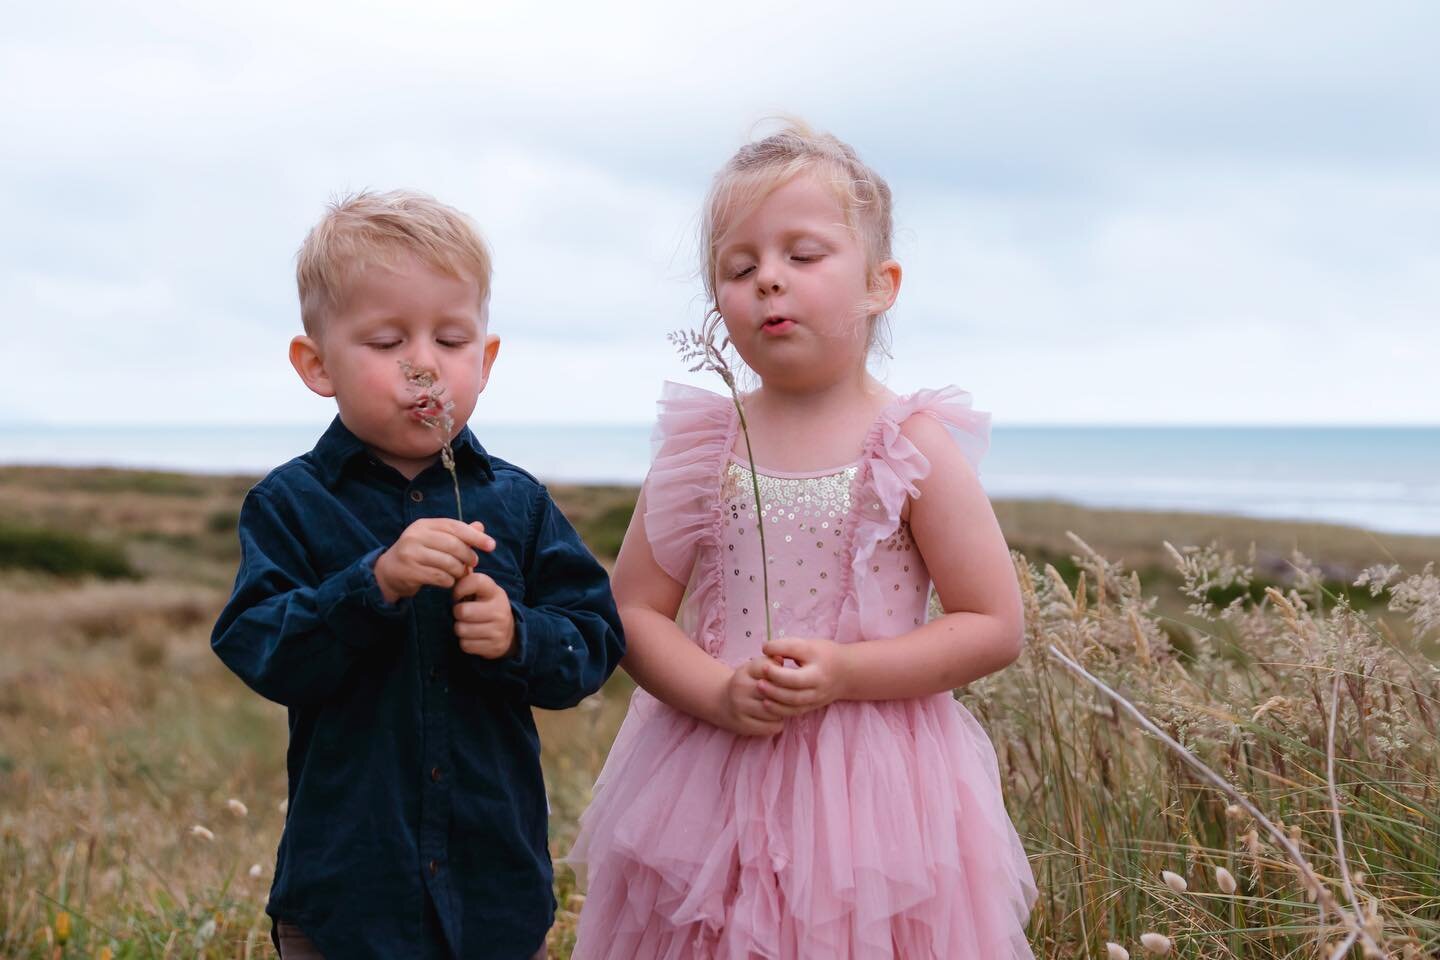 Saturday morning in the sand dunes. We&rsquo;re loving early morning starts outside, before the heat of the day hits and the beach gets busy. 

These two are obsessed with picking ALL the different grasses and blowing to see if the seeds fly off. One